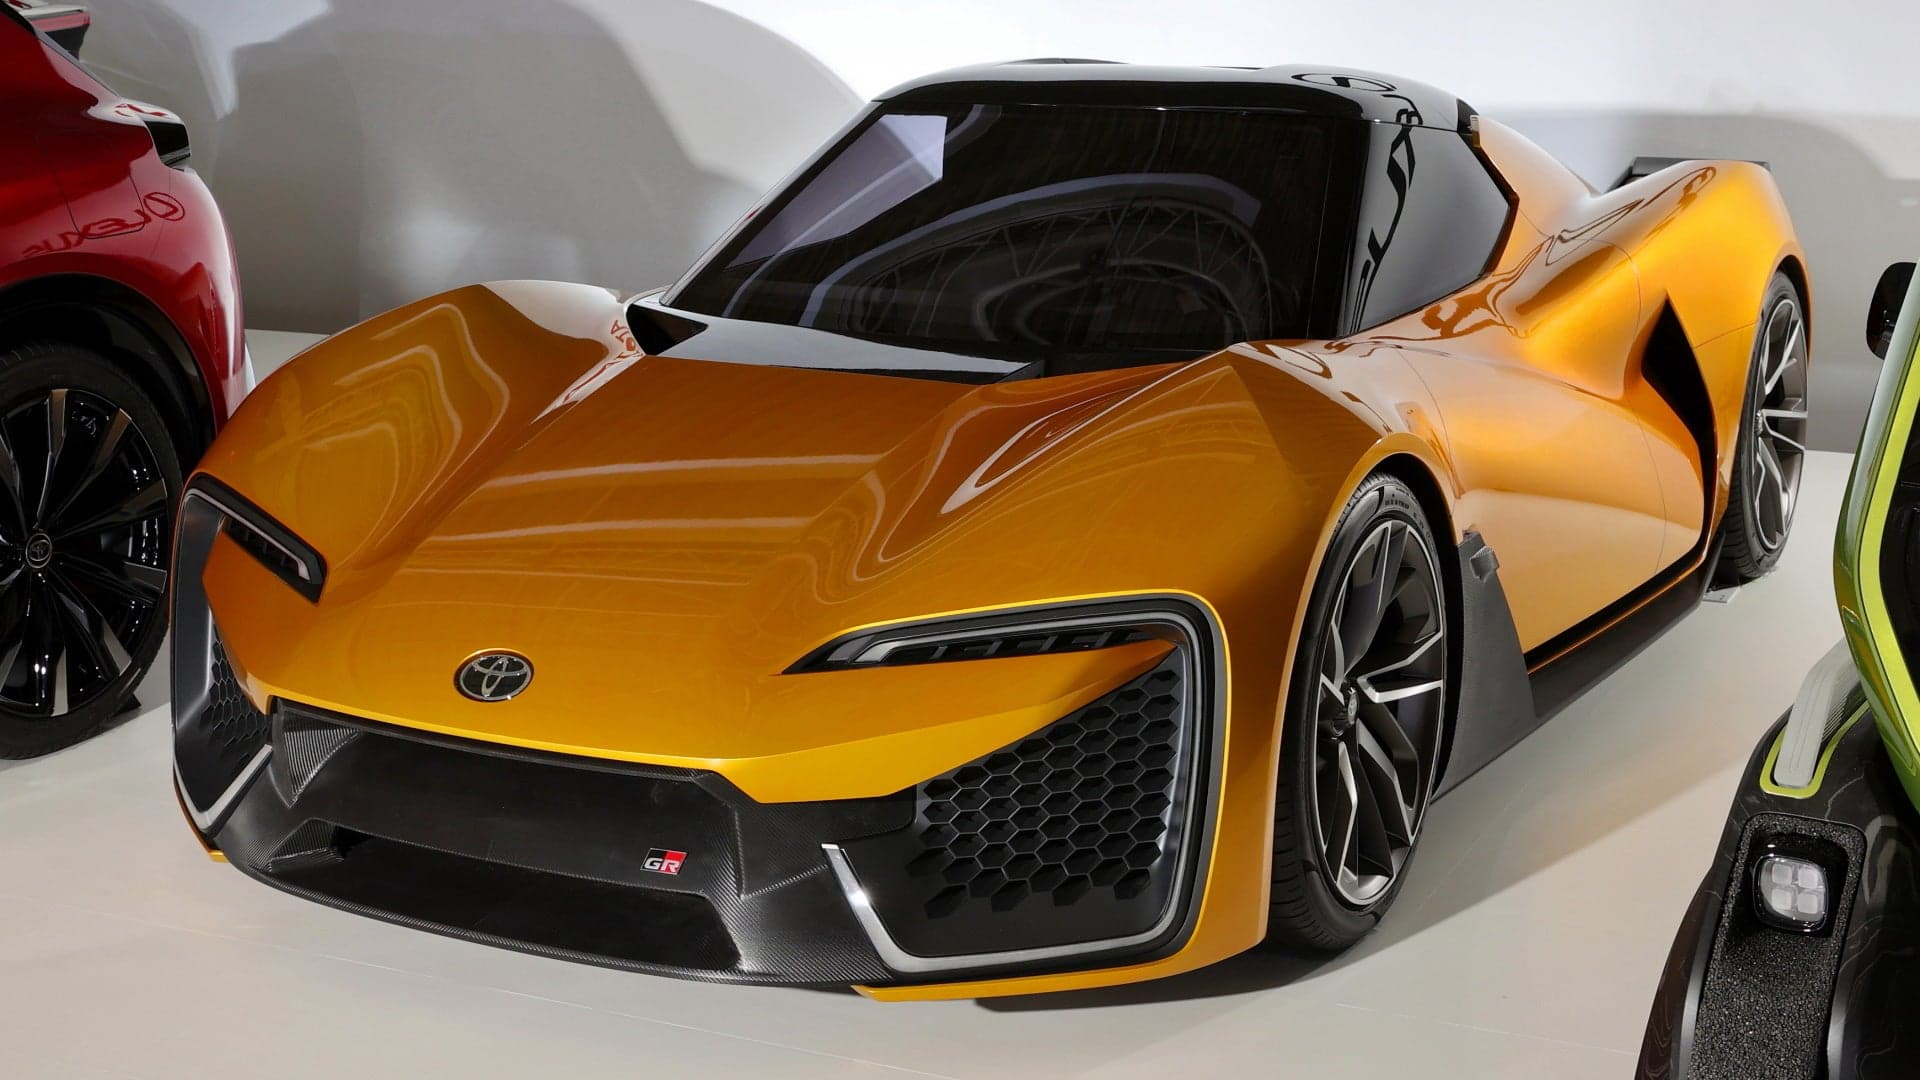 This Electrified Toyota Concept Sure Seems like a New MR2